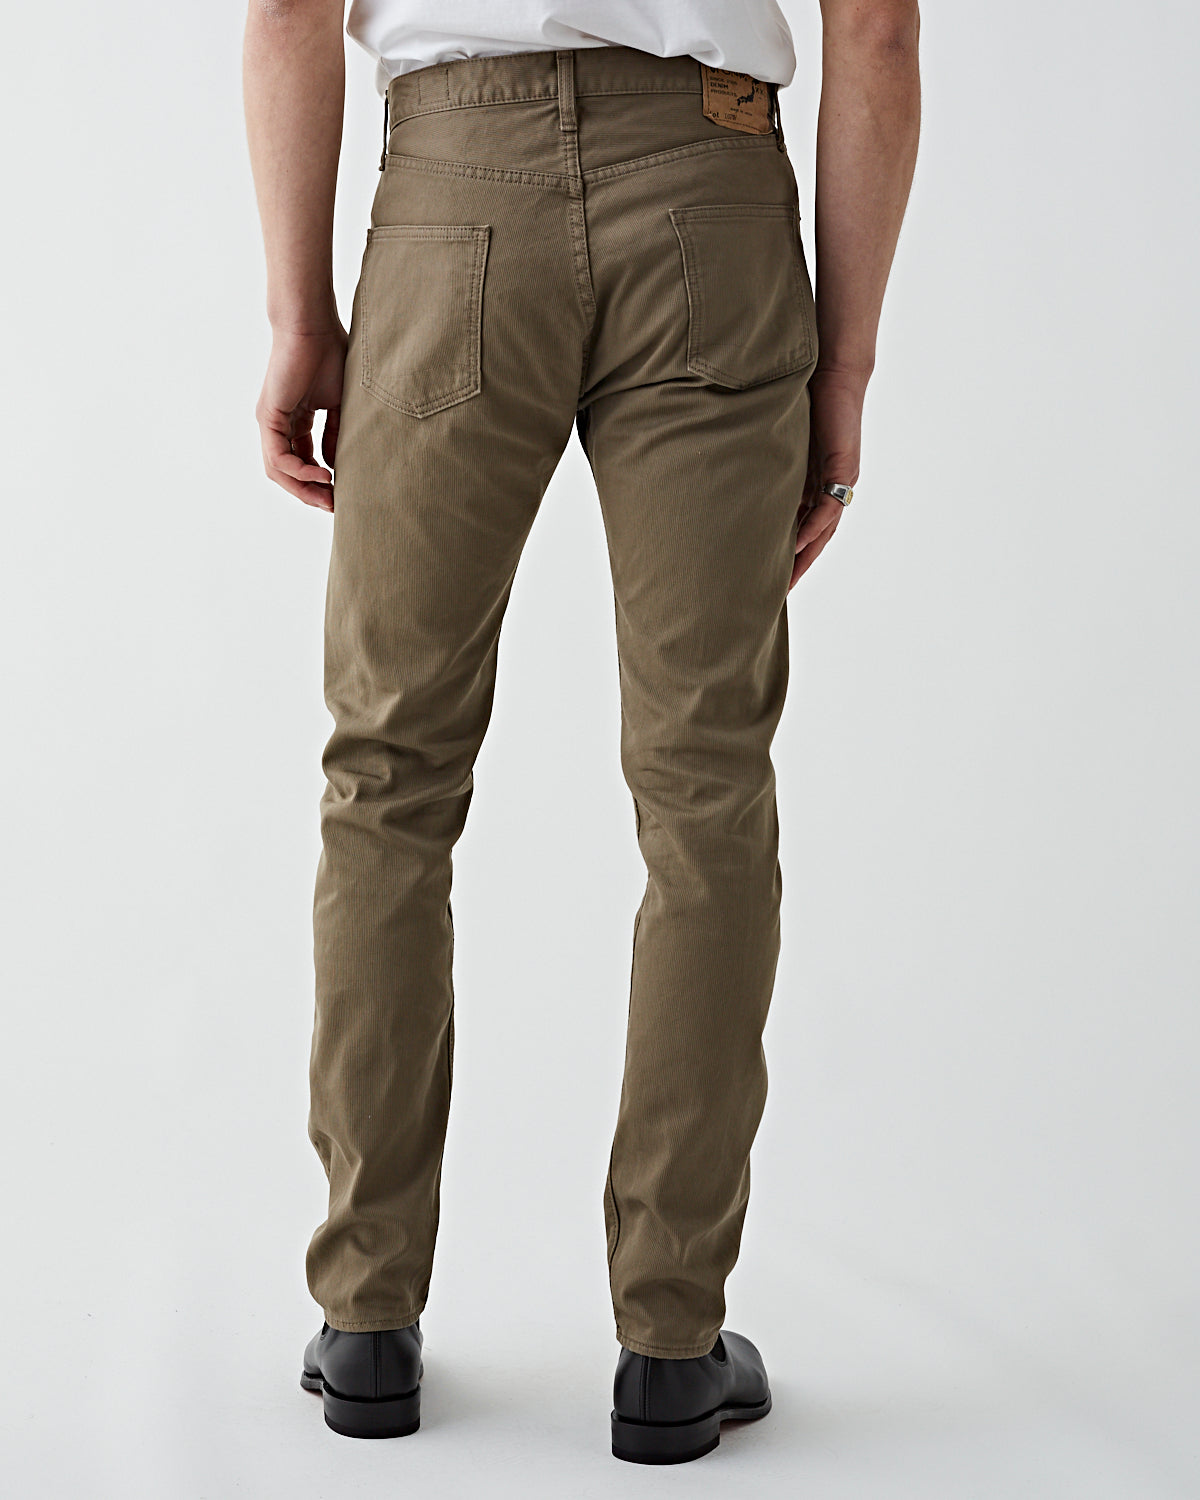 What colors look good with olive green pants? | Green pants outfit, Pants  outfit men, Olive pants men